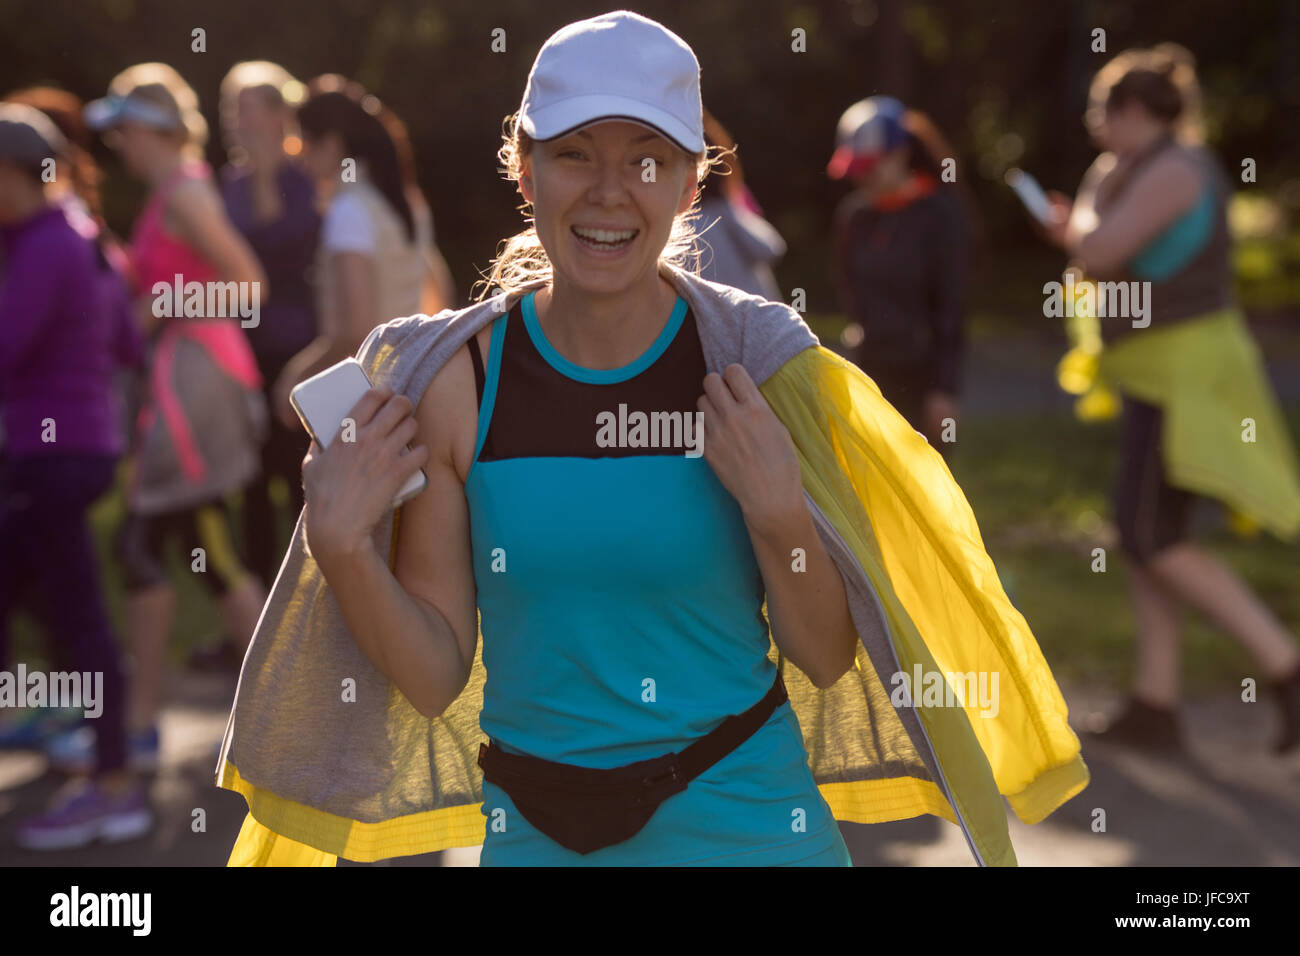 Cheerful woman in sportswear Banque D'Images